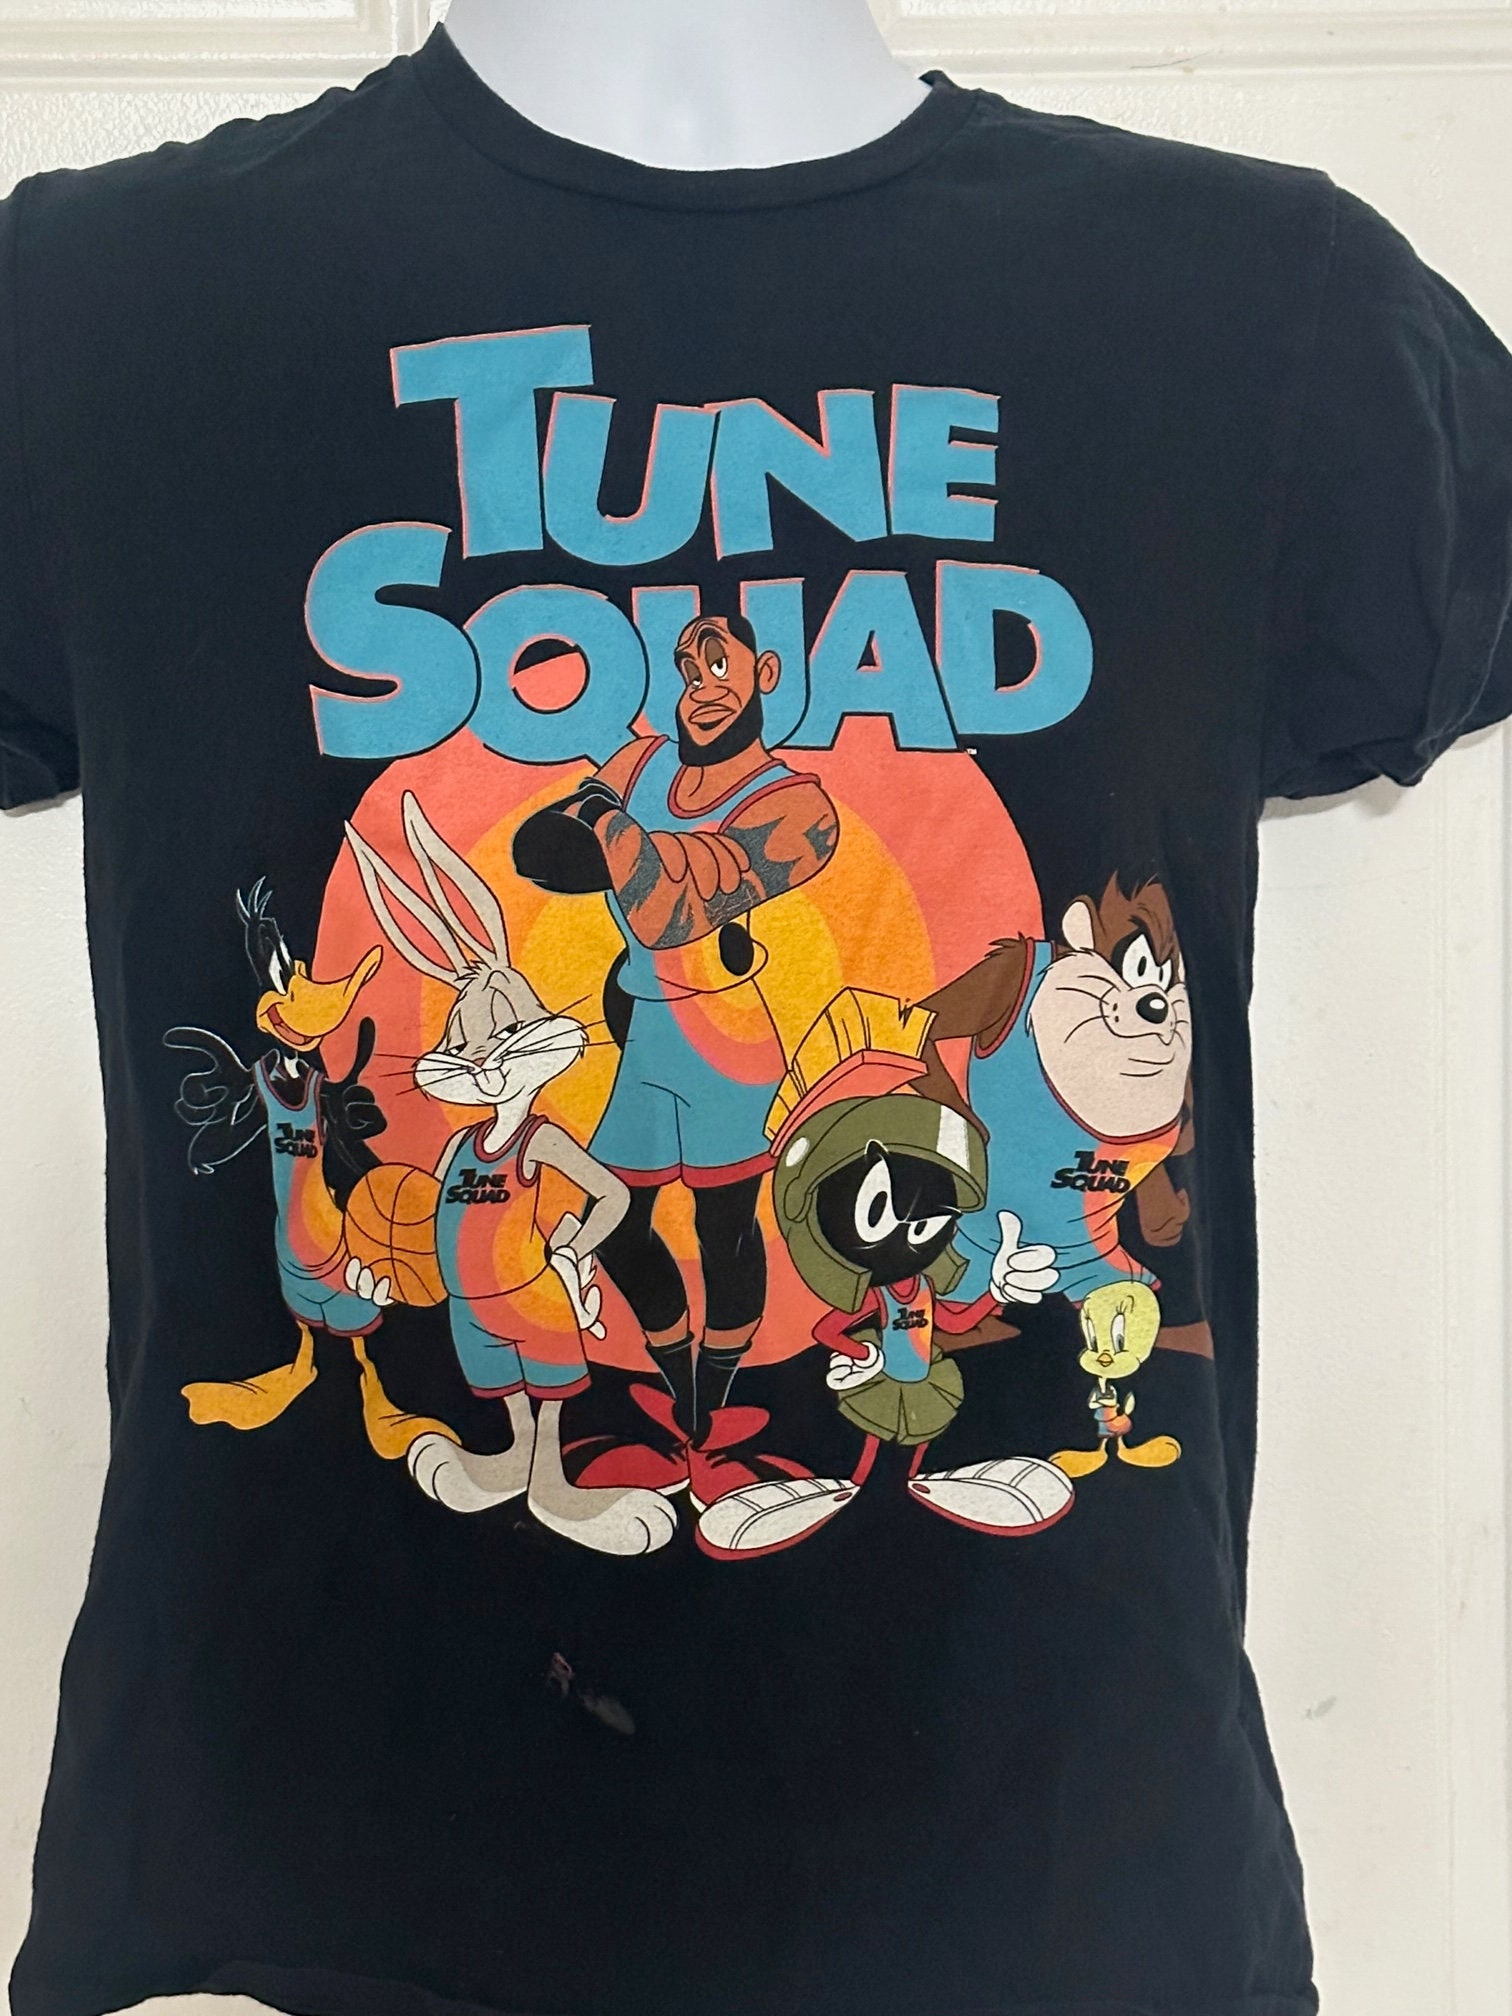 Buy Tune Squad Shirt Online In India -  India